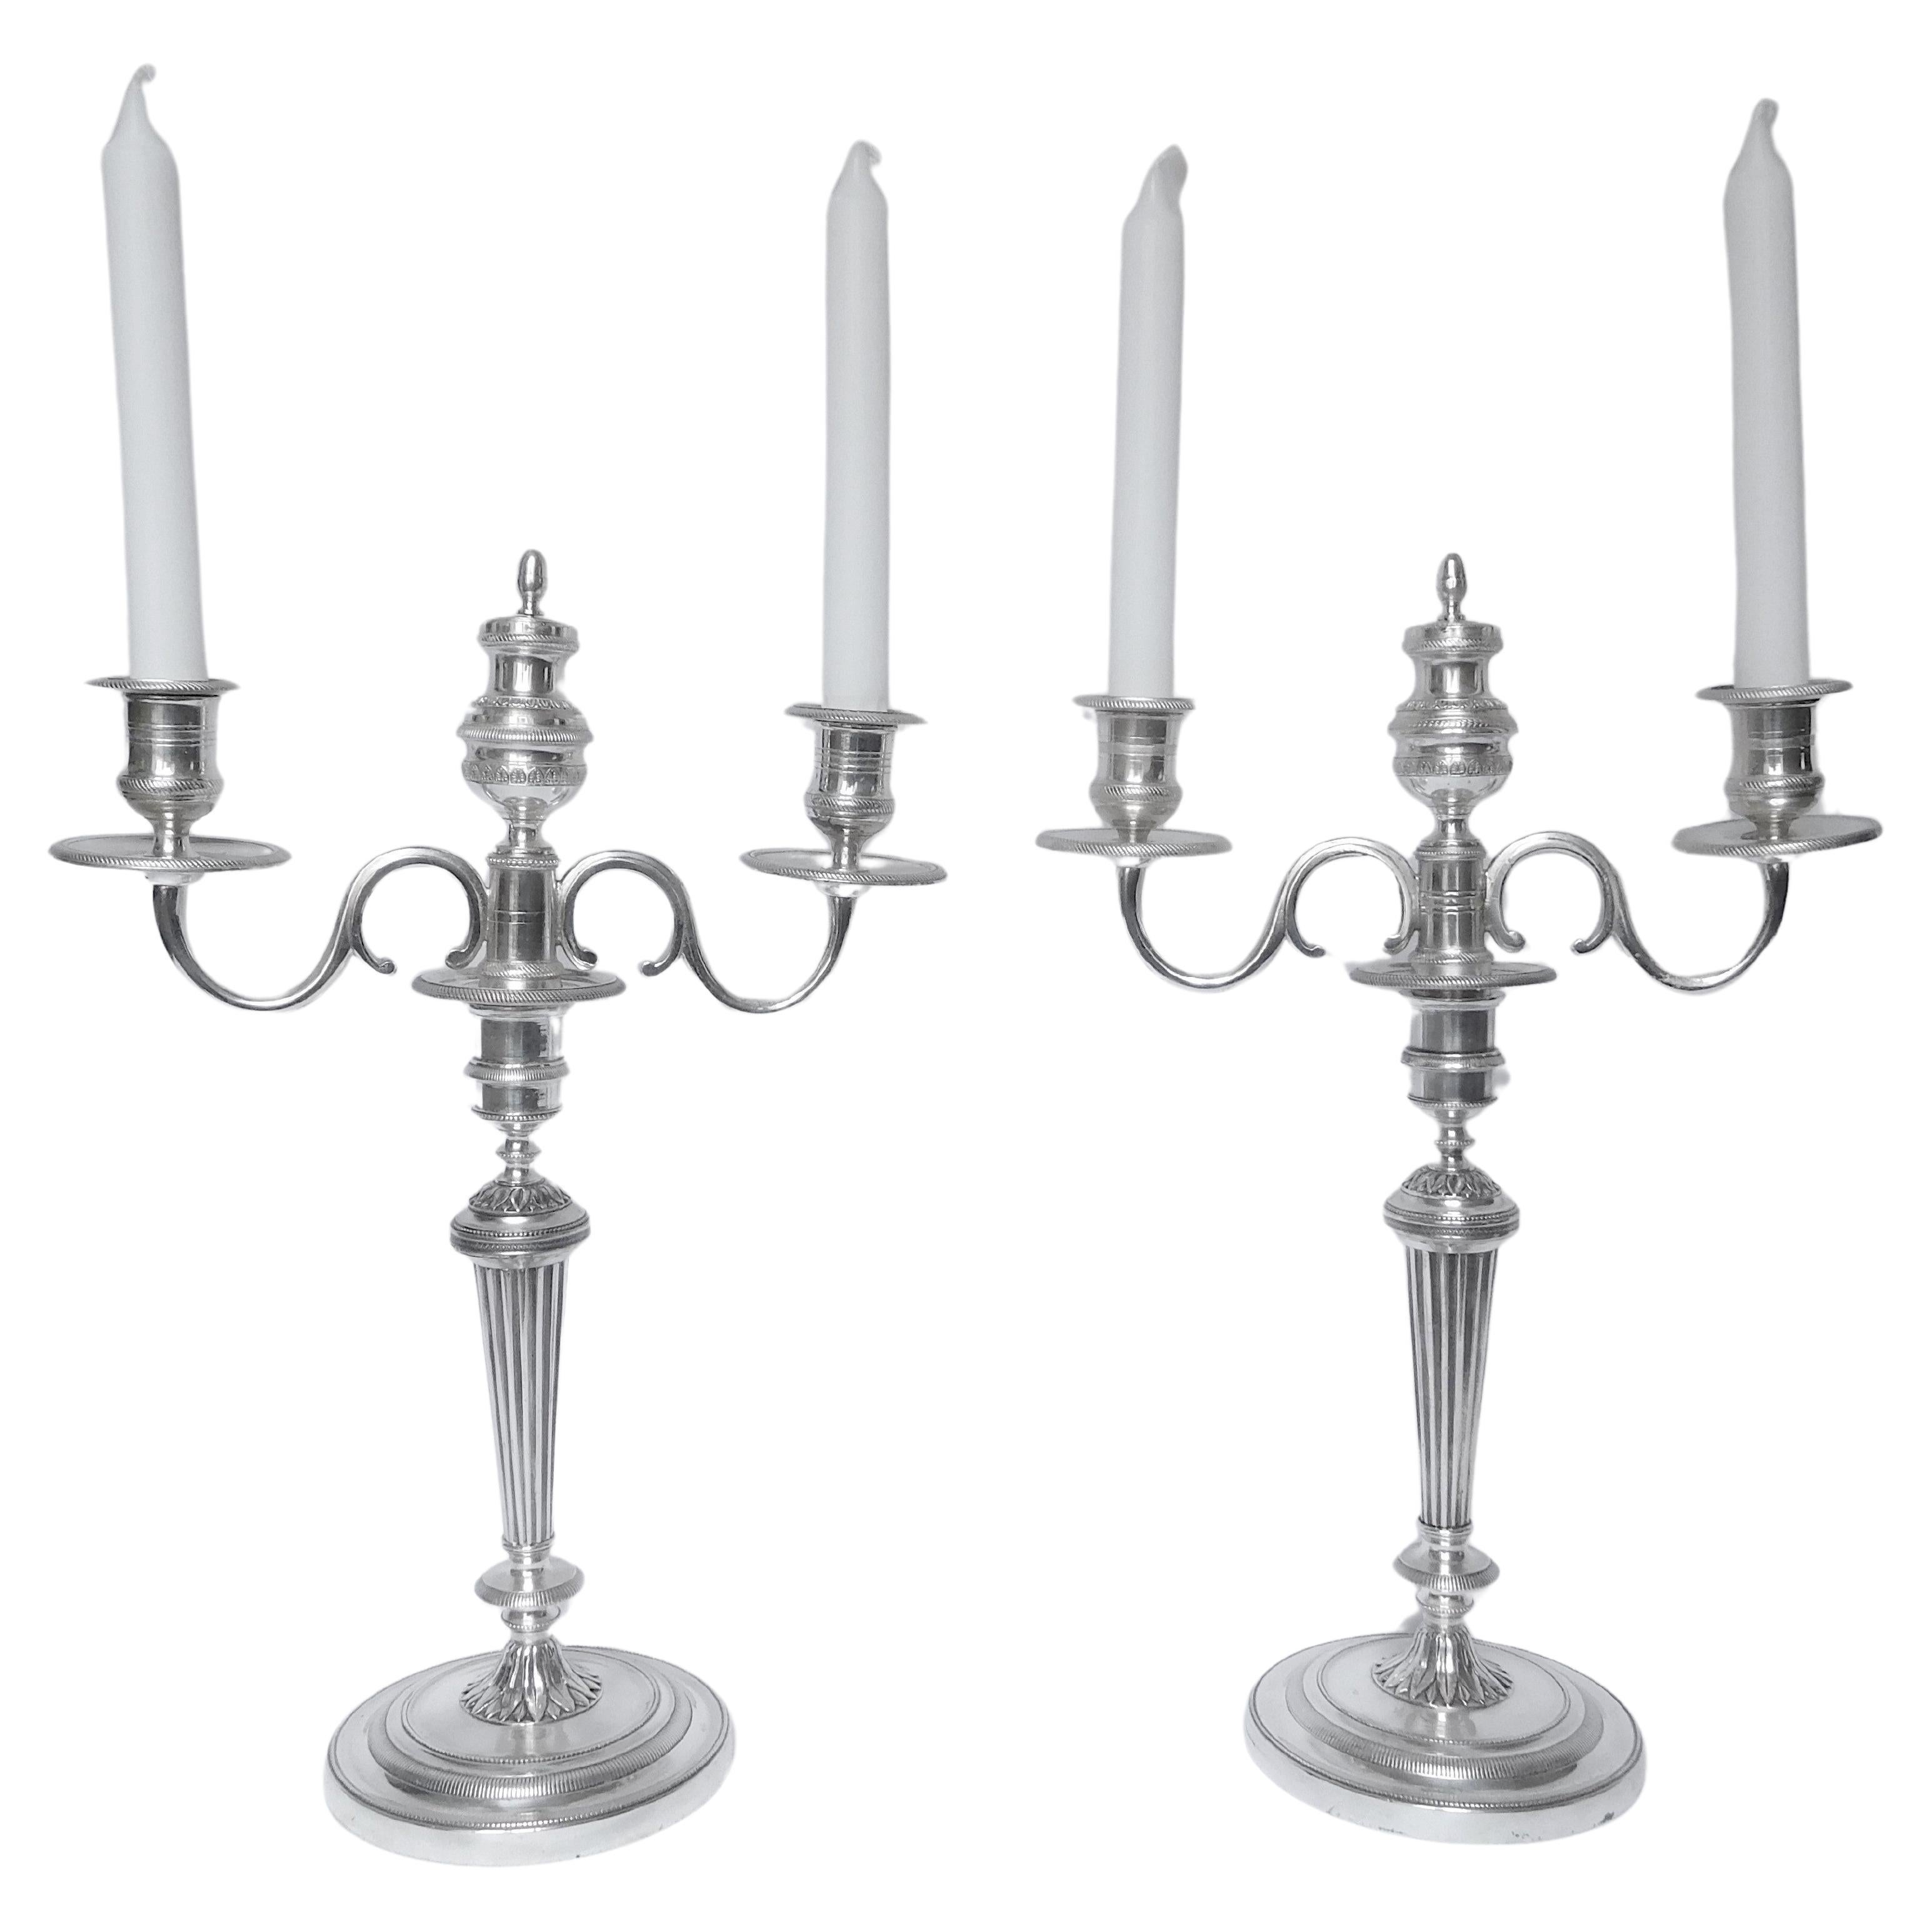 Pair of Tall Empire silver plate Candelabras by JG Galle - early 19th century For Sale